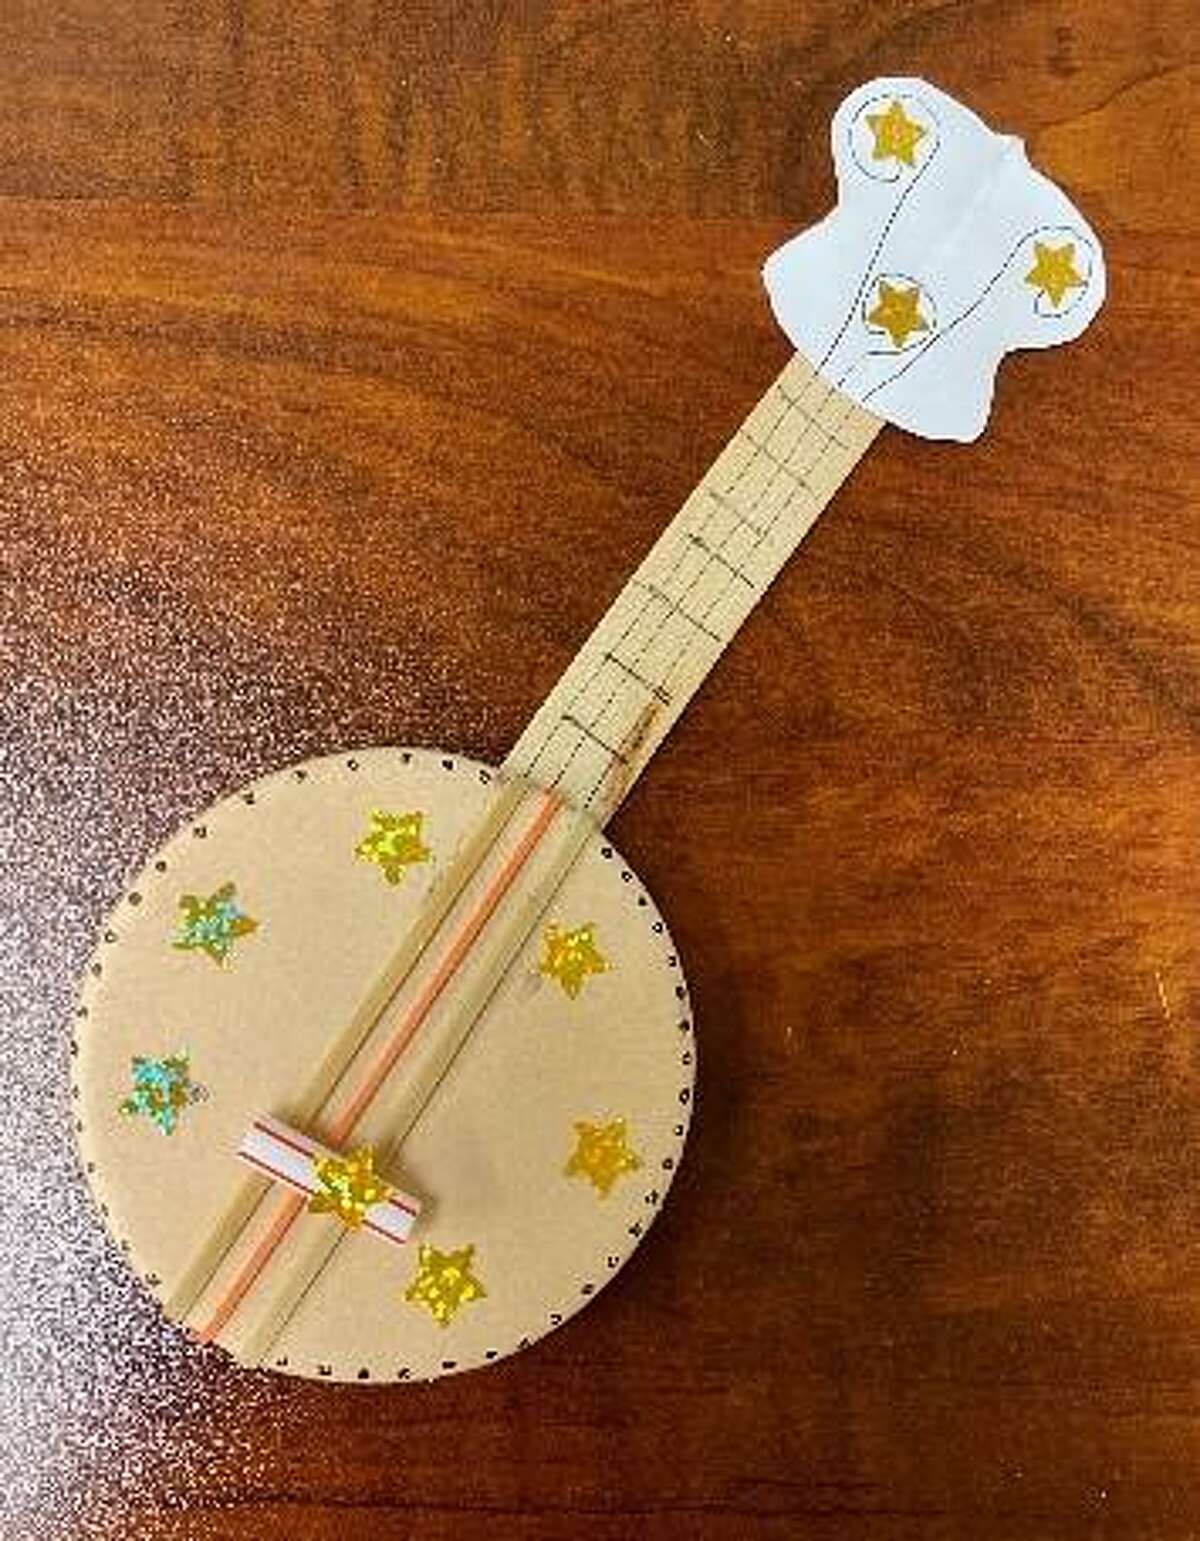 This children’s rubber band banjo activity was adapted from a Beyond the Briscoe craft lesson.